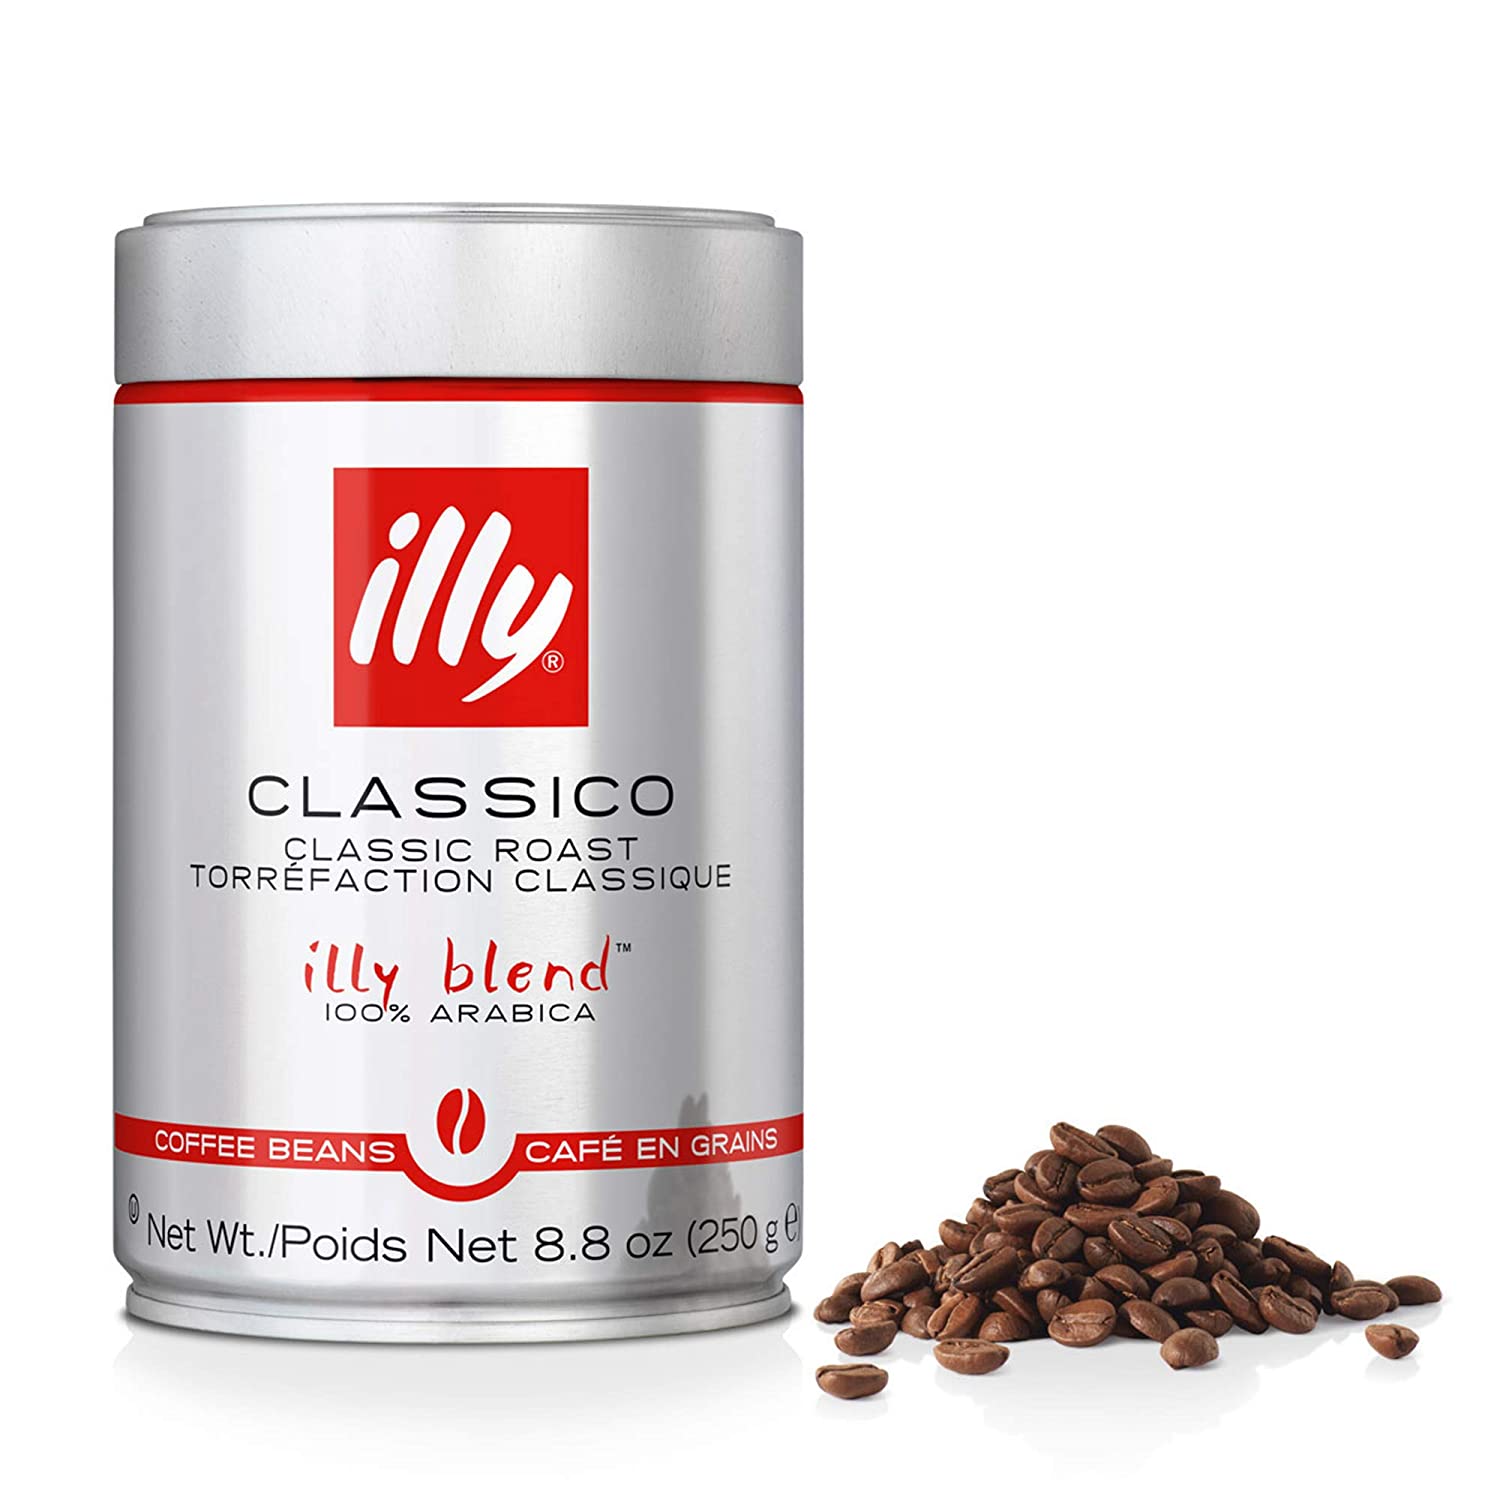 Where to Buy Illy Coffee